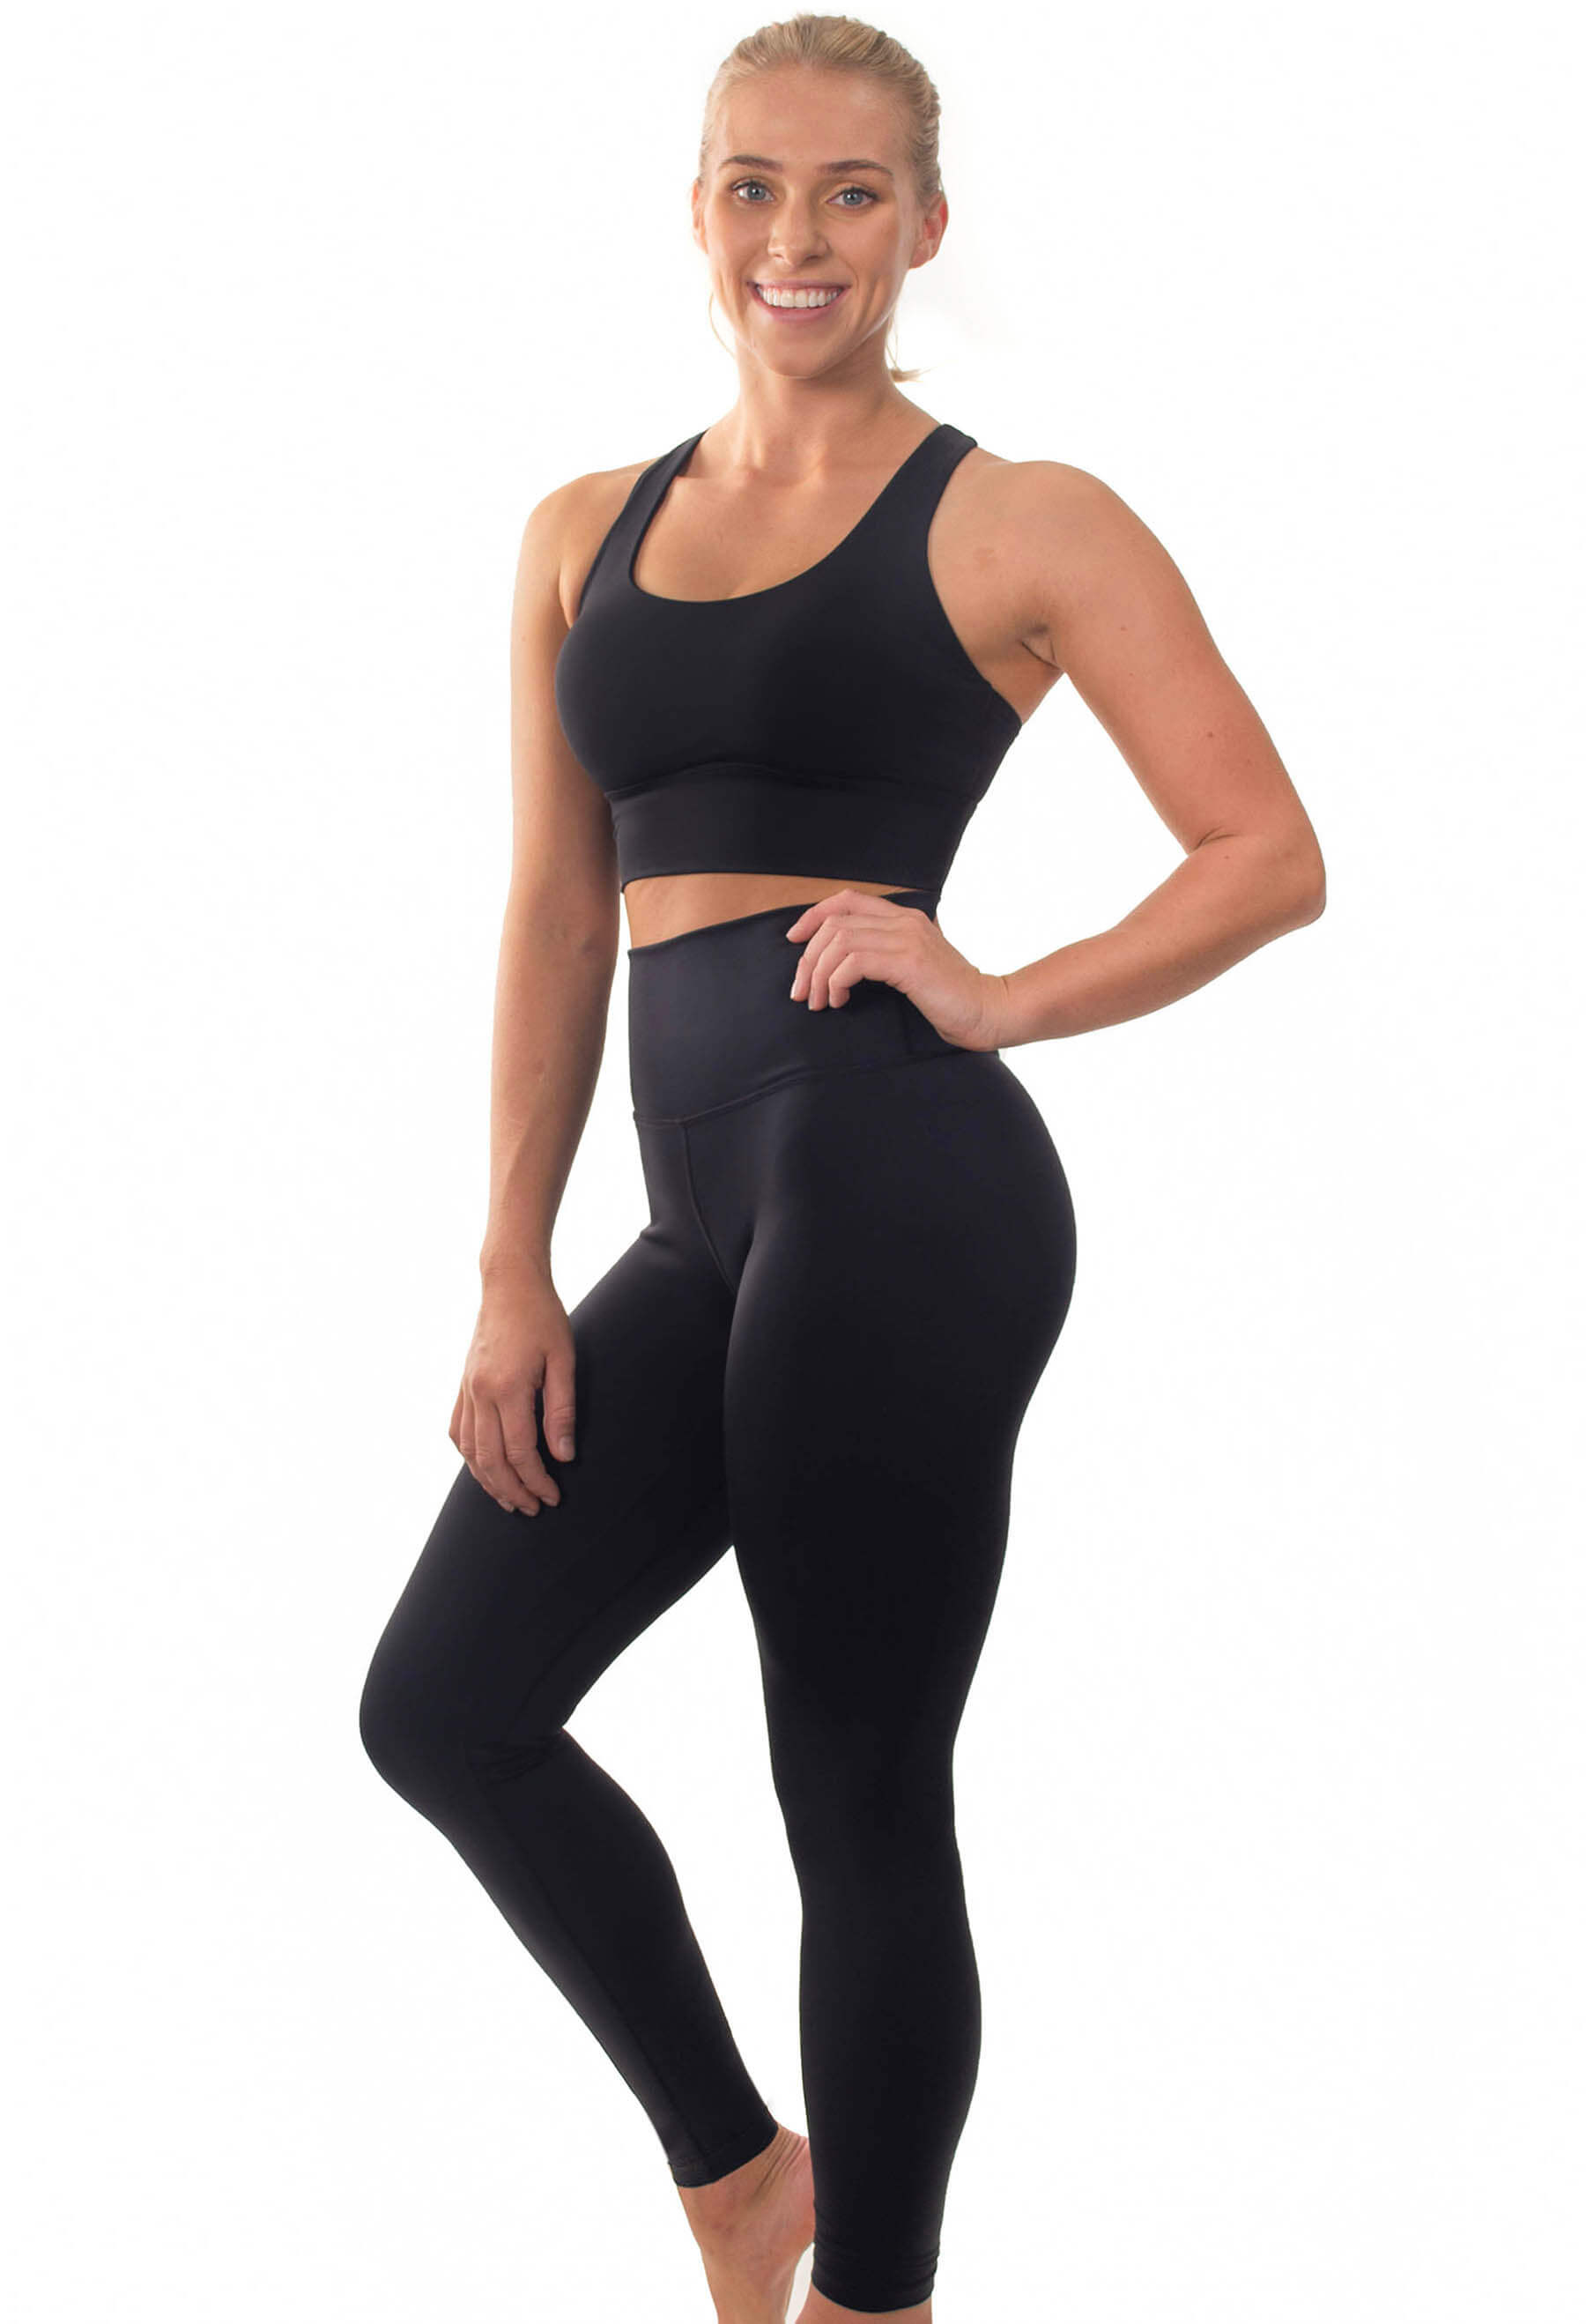 Sports leggings with lettering